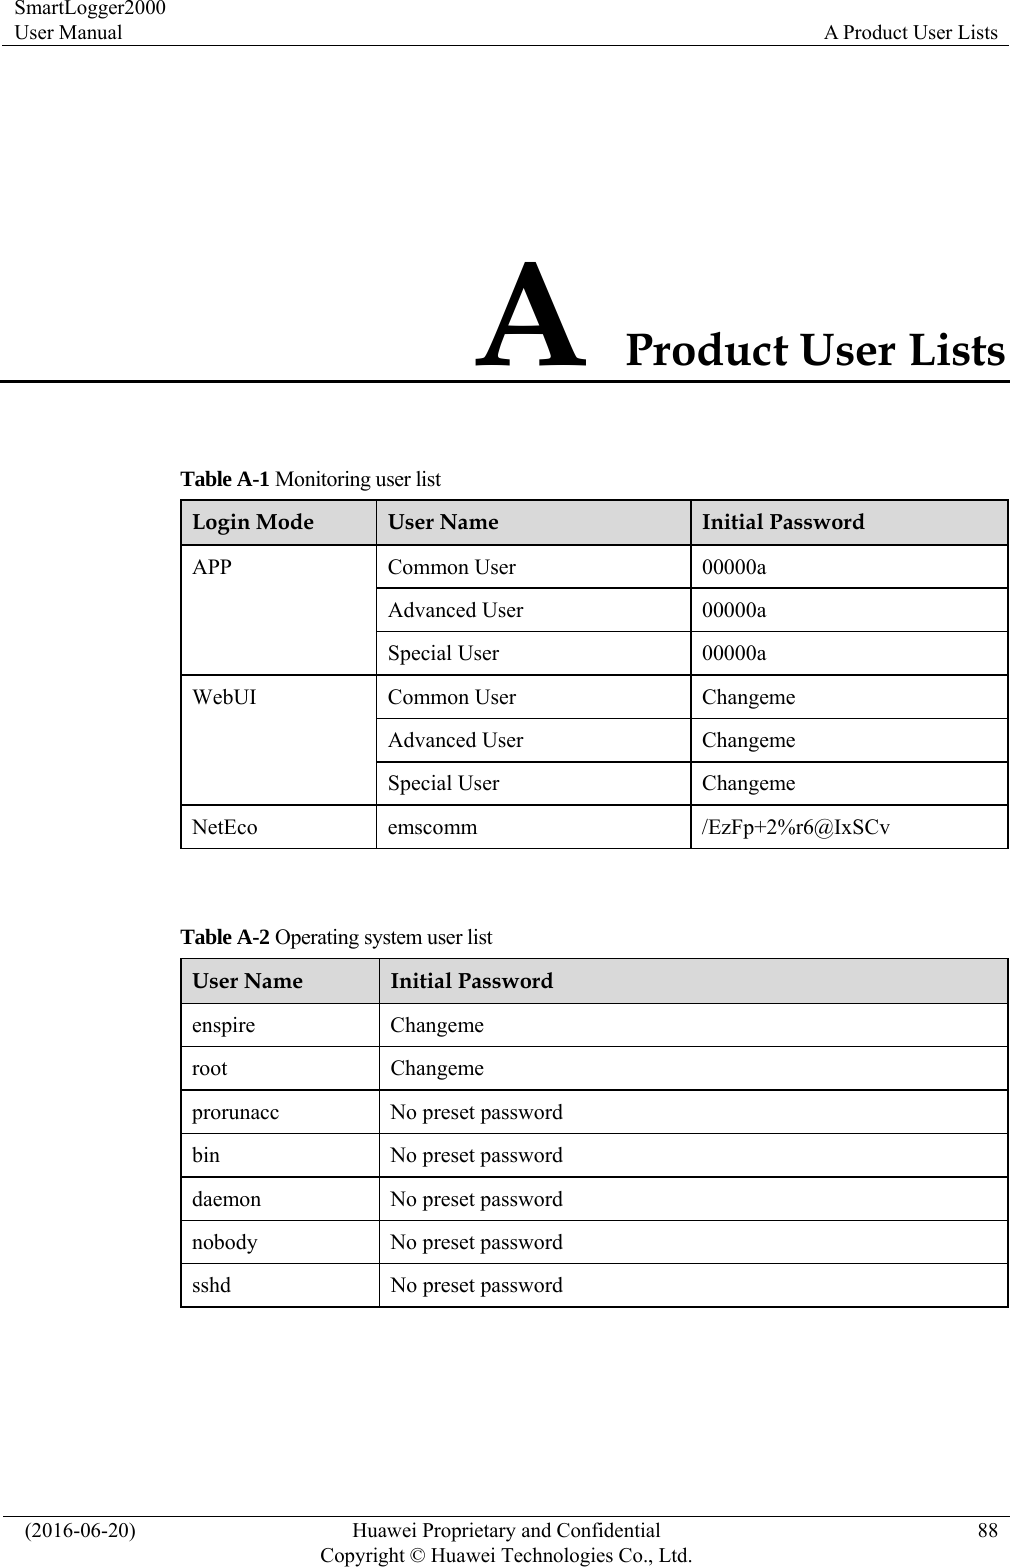 SmartLogger2000 User Manual  A Product User Lists   (2016-06-20)  Huawei Proprietary and Confidential         Copyright © Huawei Technologies Co., Ltd.88 A Product User Lists Table A-1 Monitoring user list Login Mode  User Name  Initial Password   APP Common User  00000a Advanced User  00000a Special User  00000a WebUI Common User  Changeme Advanced User  Changeme Special User  Changeme NetEco emscomm  /EzFp+2%r6@IxSCv  Table A-2 Operating system user list User Name  Initial Password   enspire Changeme root Changeme prorunacc  No preset password bin  No preset password daemon  No preset password nobody  No preset password sshd  No preset password 